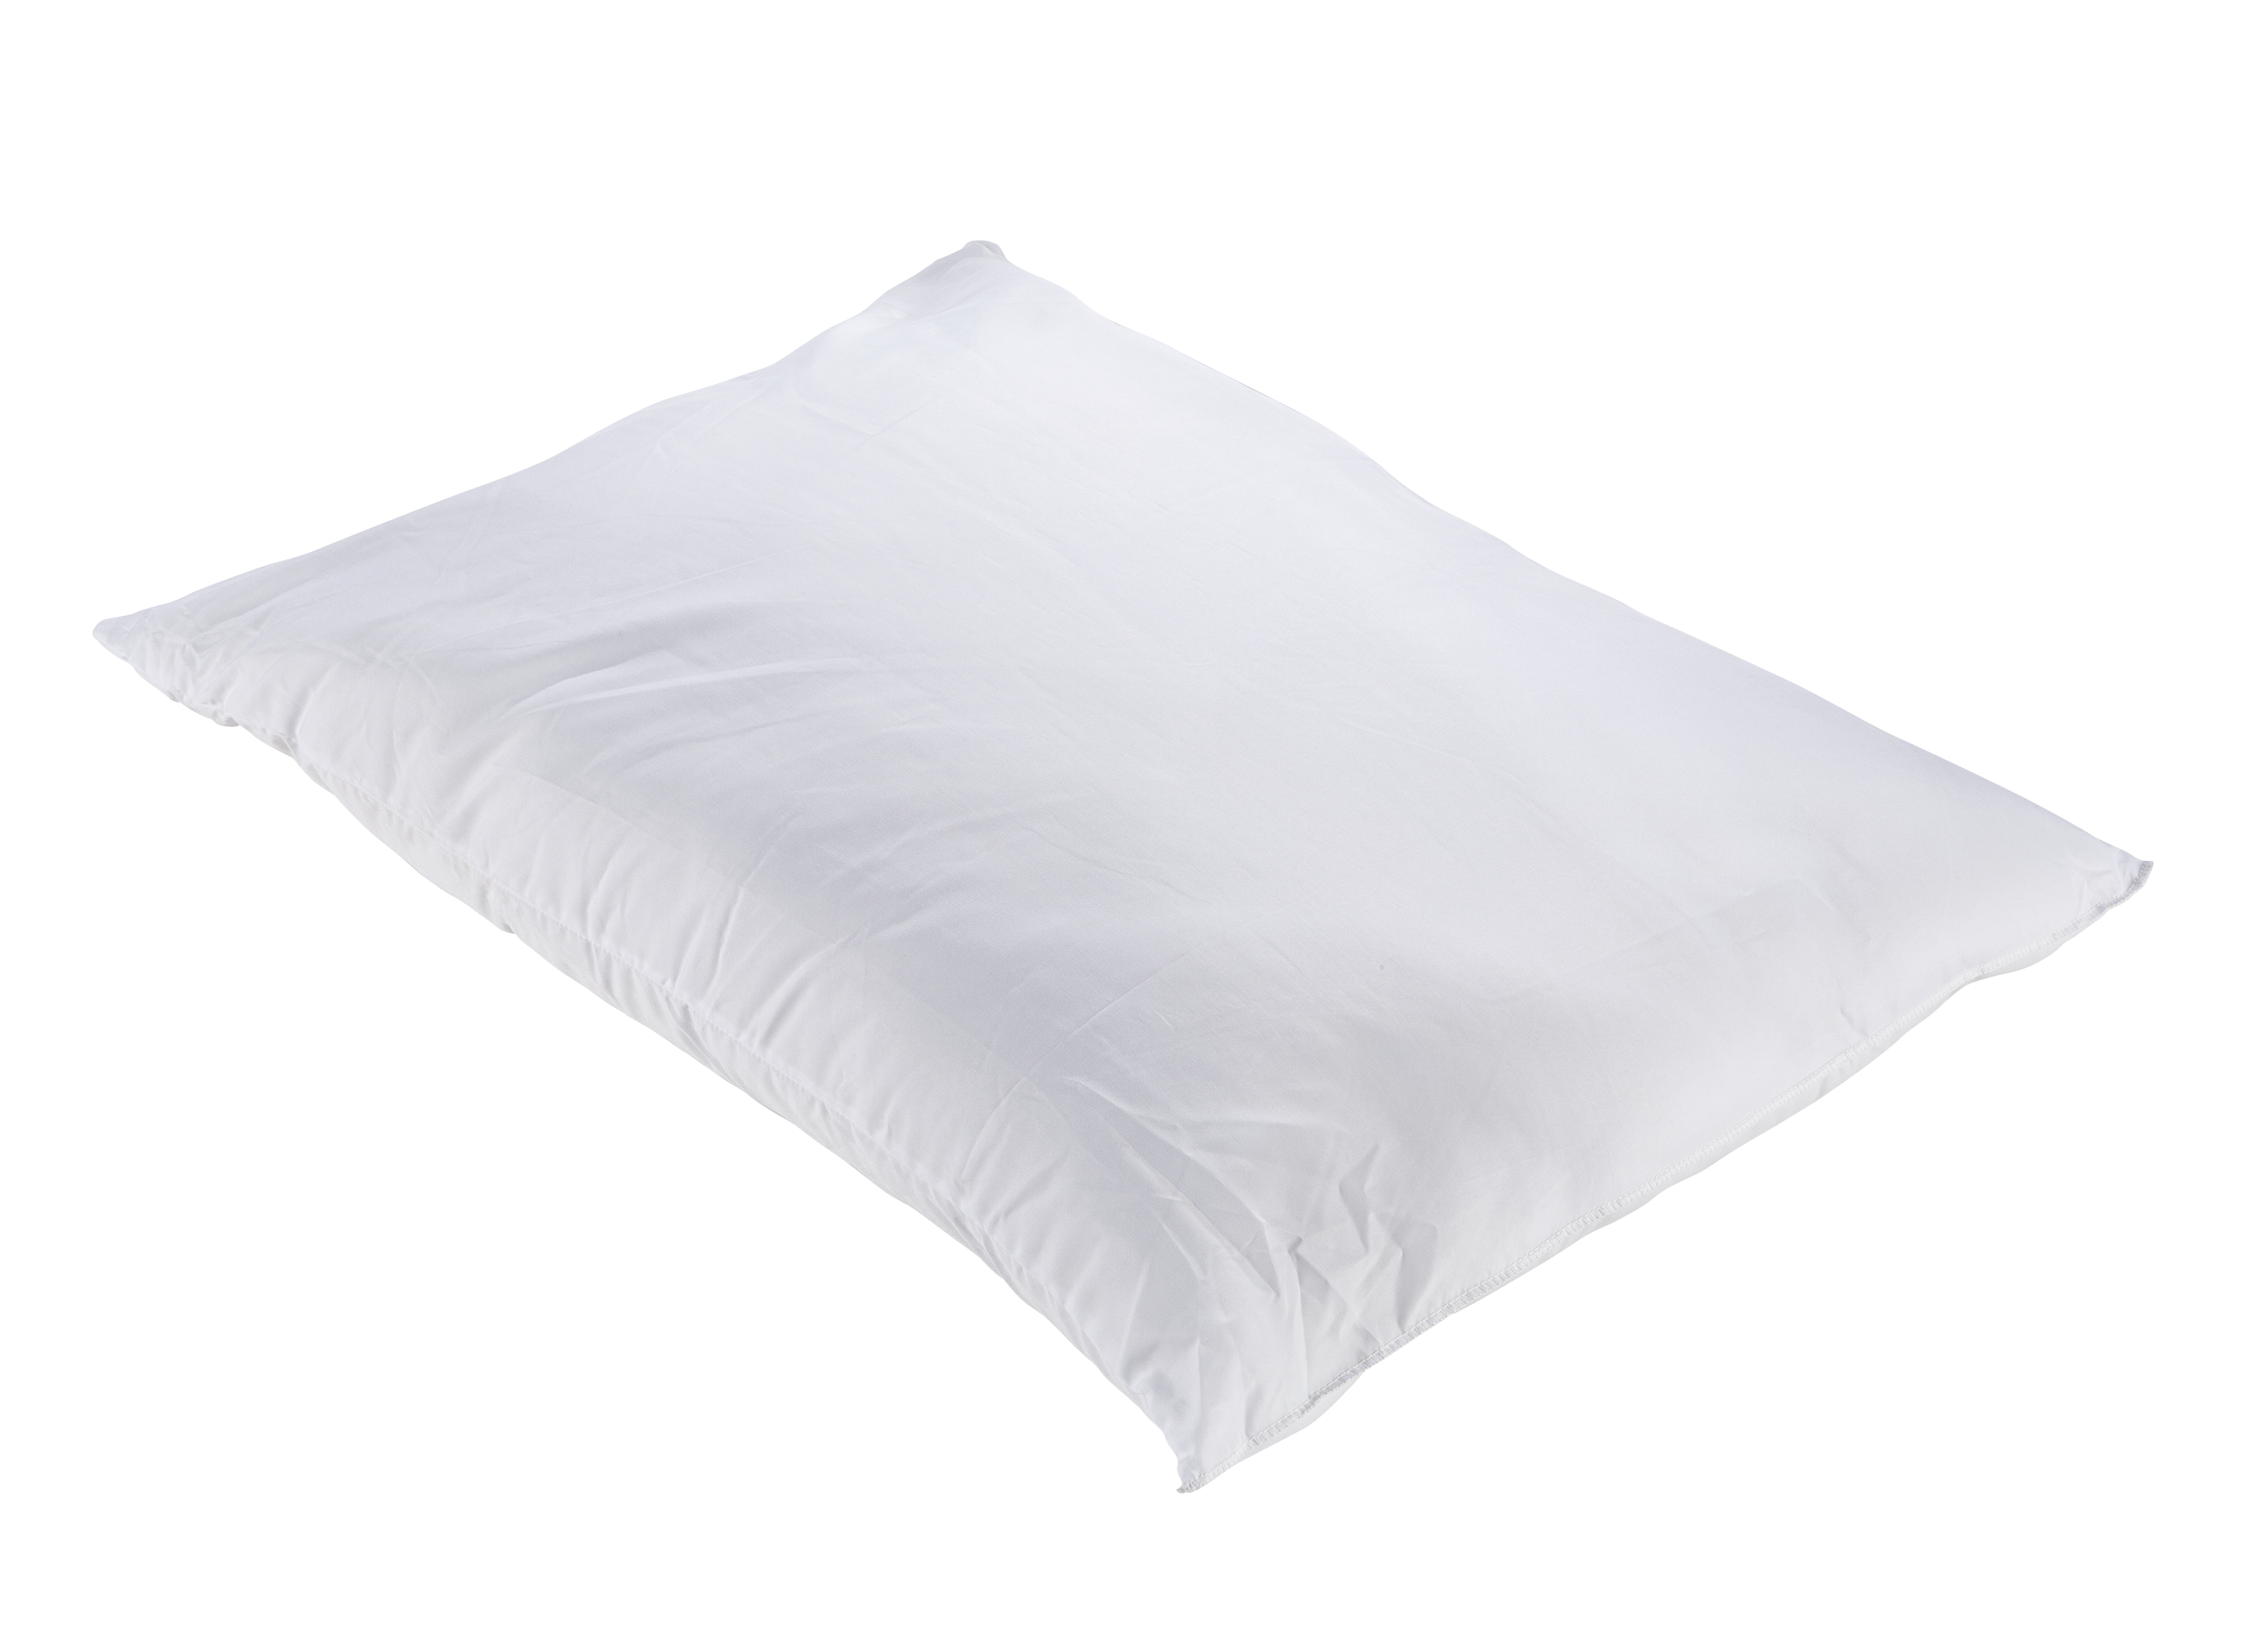 https://crdms.images.consumerreports.org/prod/products/cr/models/404450-pillows-the-big-one-microfiber-10022740.png